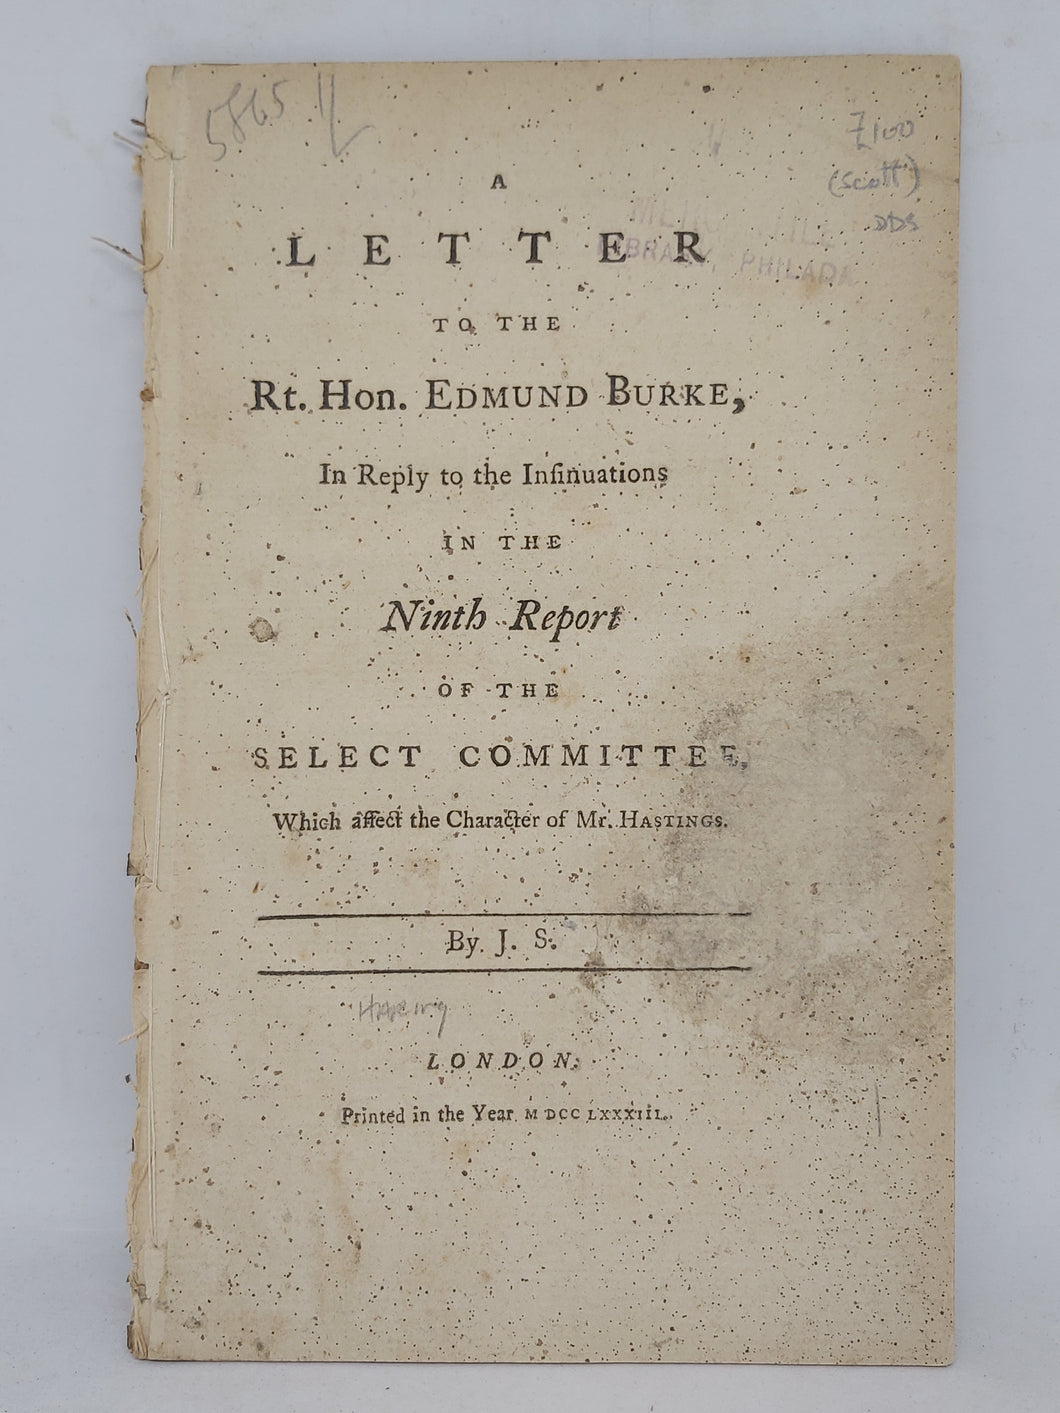 A letter to the Rt. Hon. Edmund Burke: in reply to the insinuations in the ninth report of the Select Committee, which affect the character of Mr. Hastings, 1783